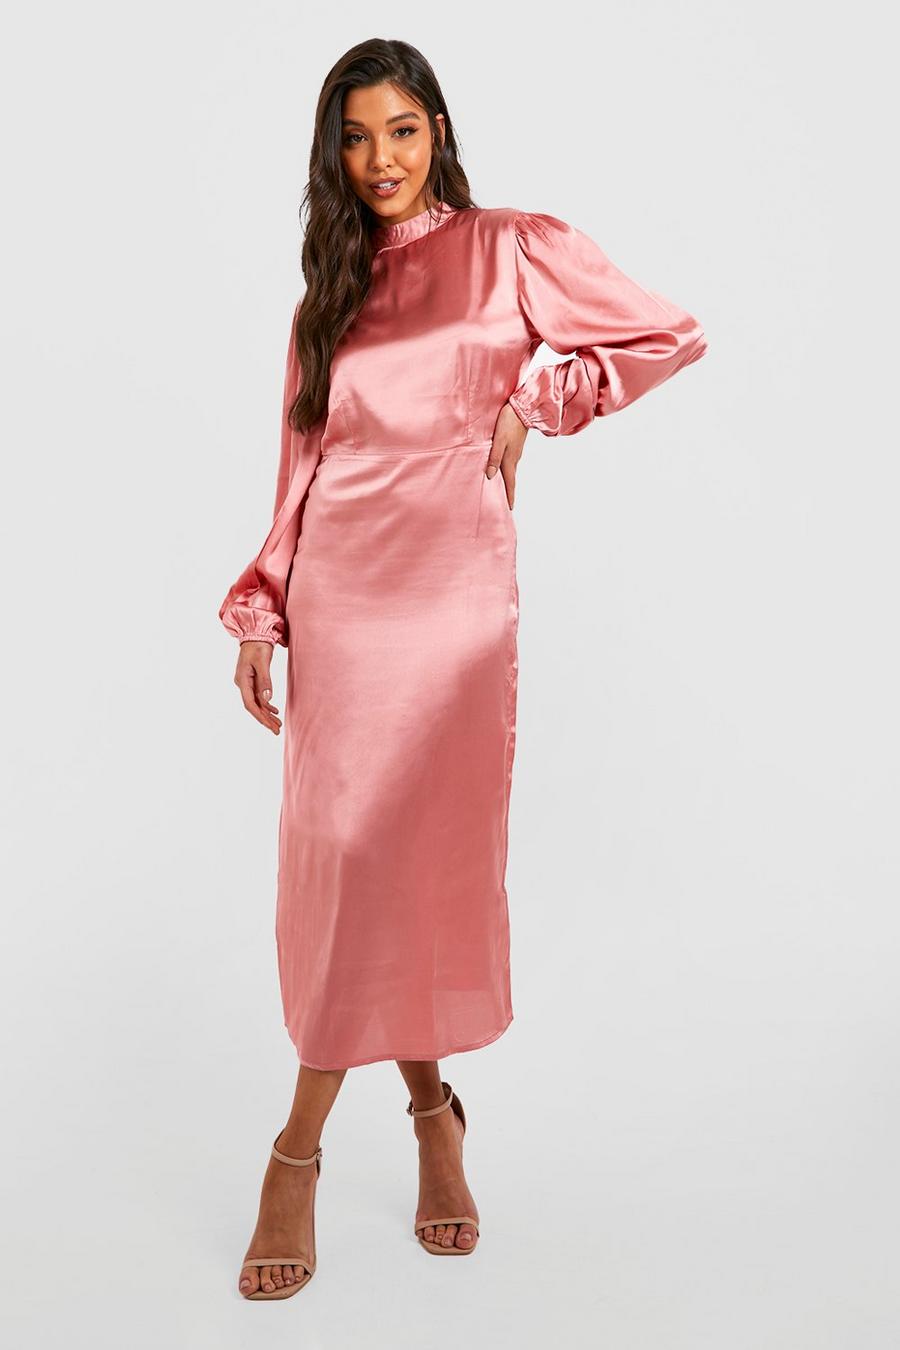 Rose pink The Satin Open Back Midaxi Dress